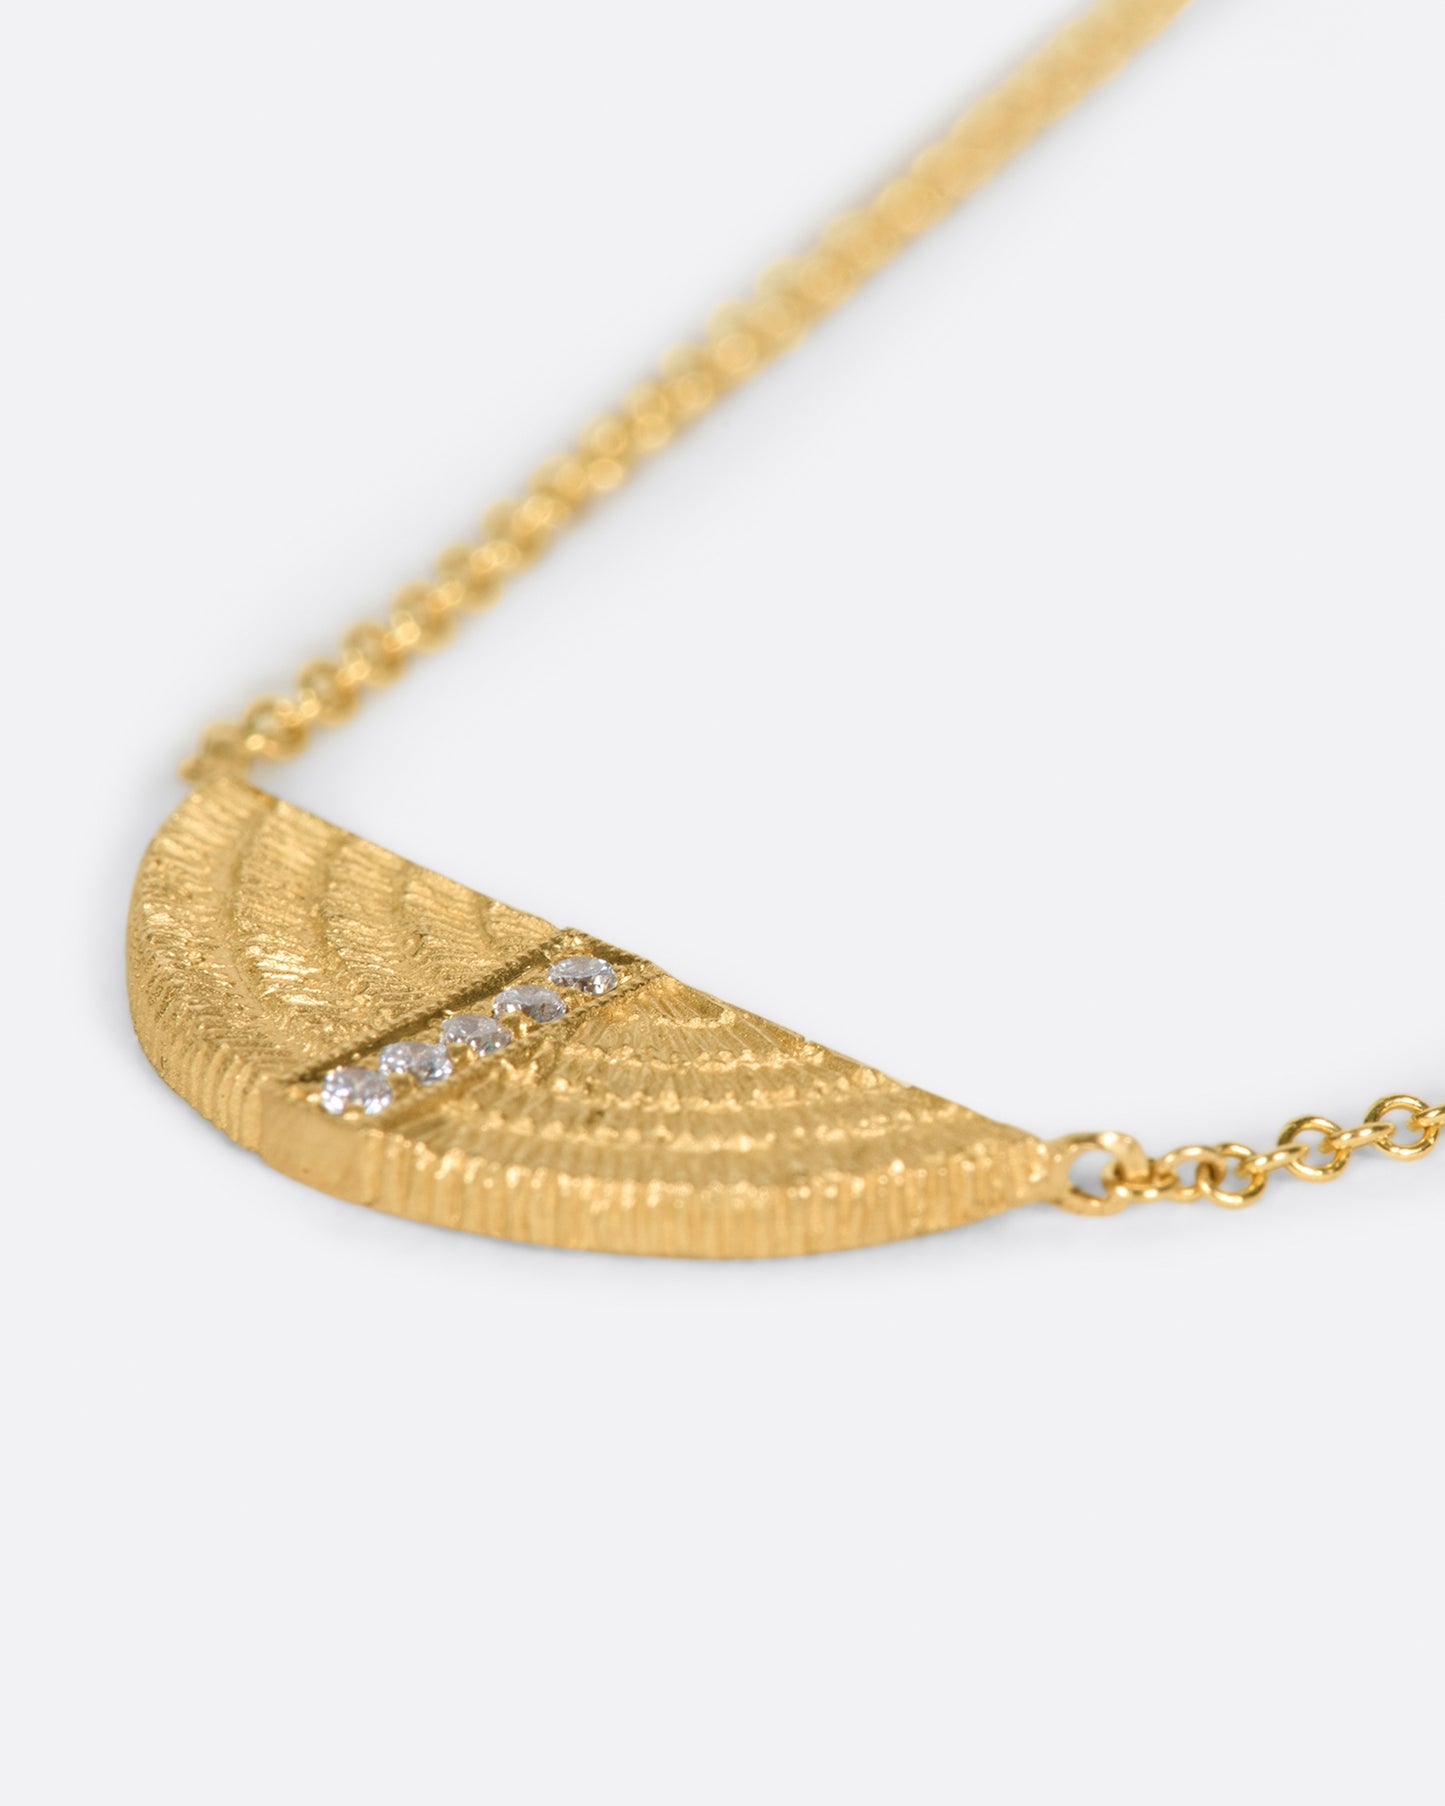 A necklace with a semi-circular pendant with five diamonds, shown laying flat.